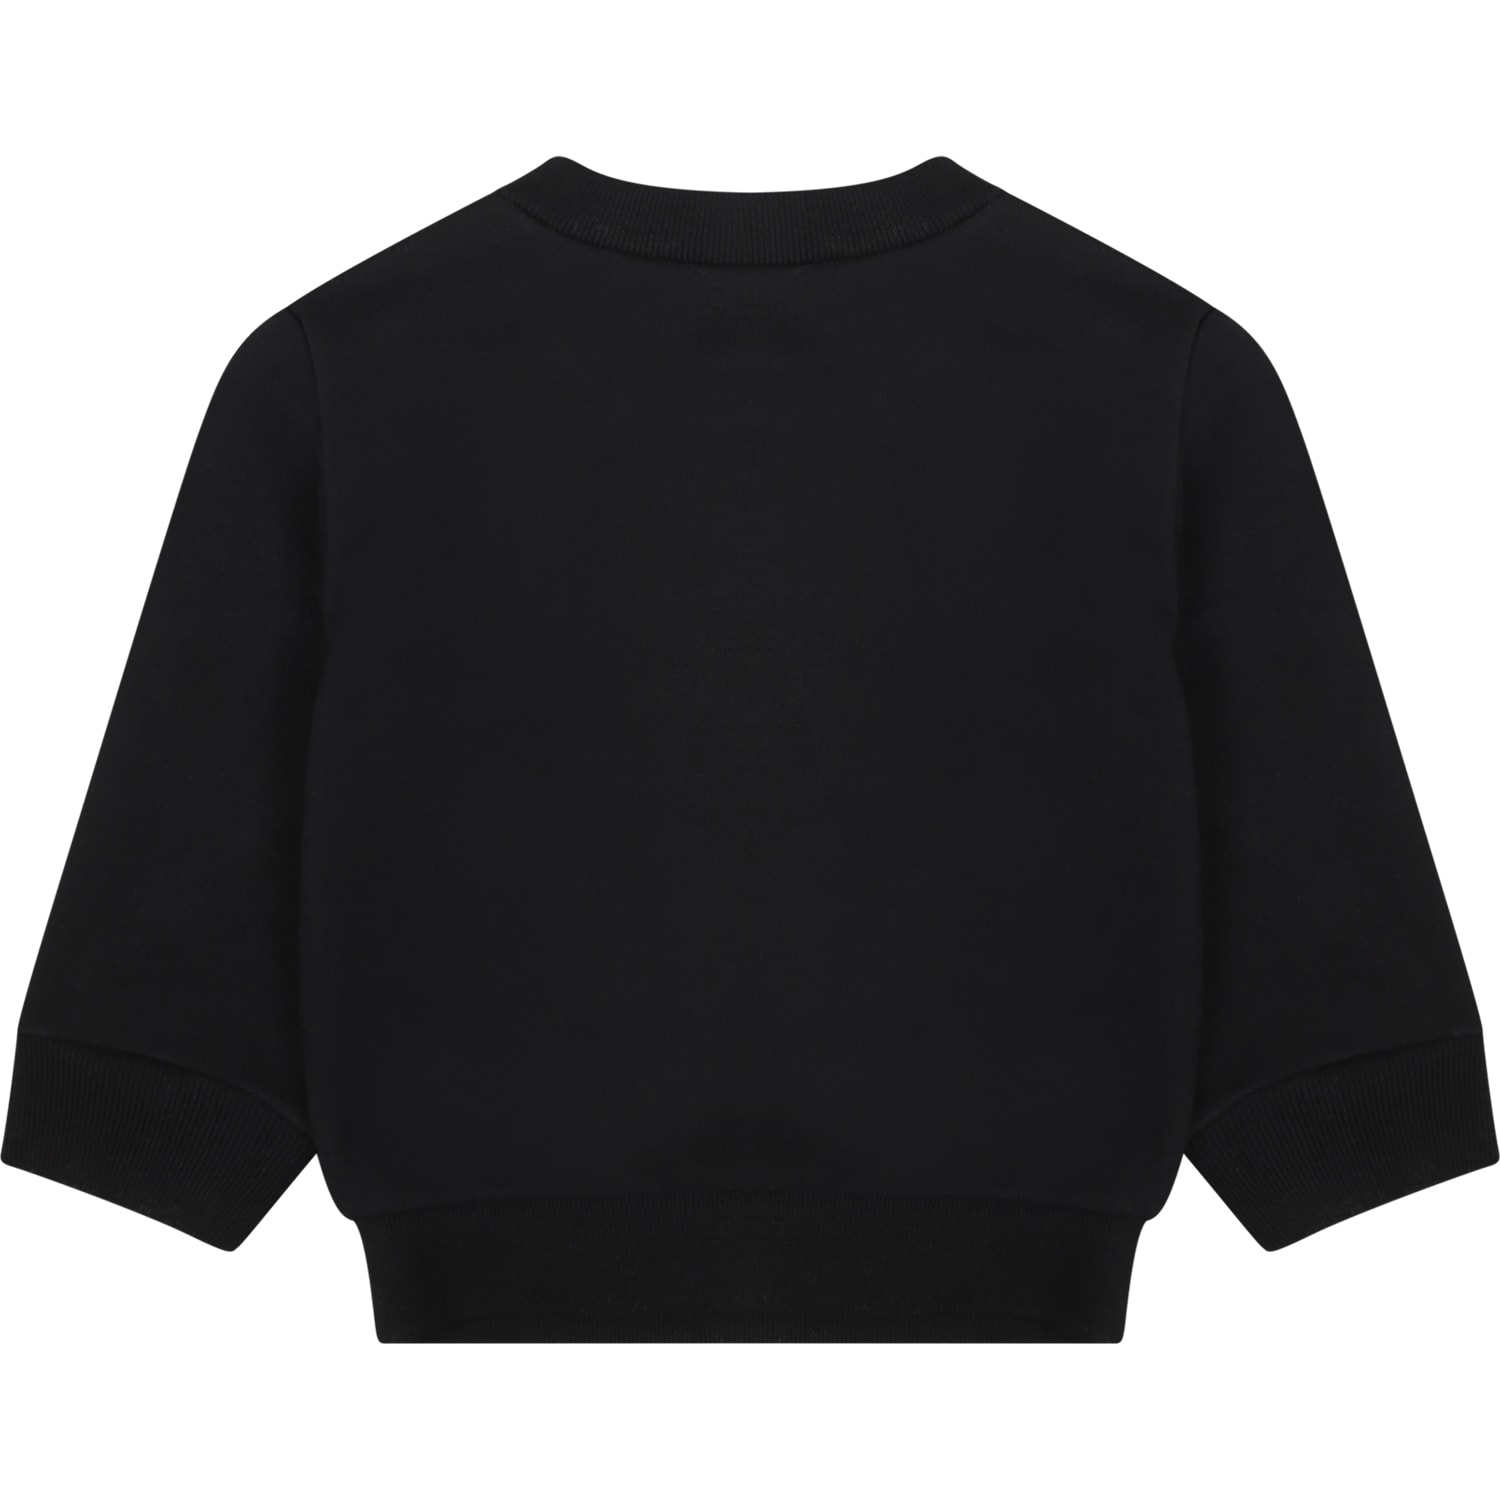 Shop Dsquared2 Black Sweatshirt For Baby Boy With Logo